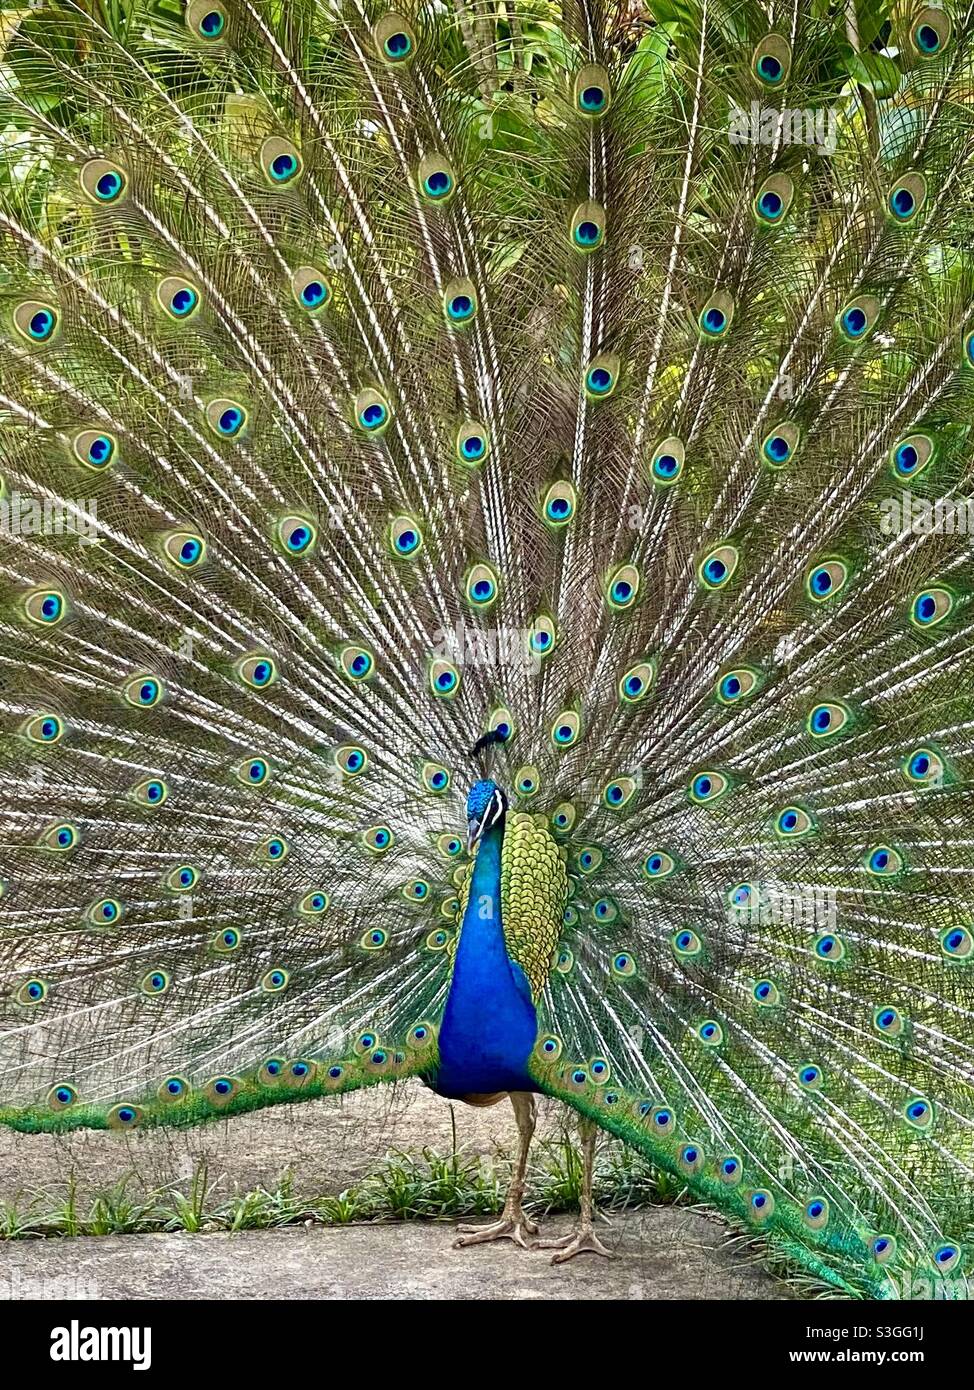 Male peacock feather displays eyespots Stock Photo